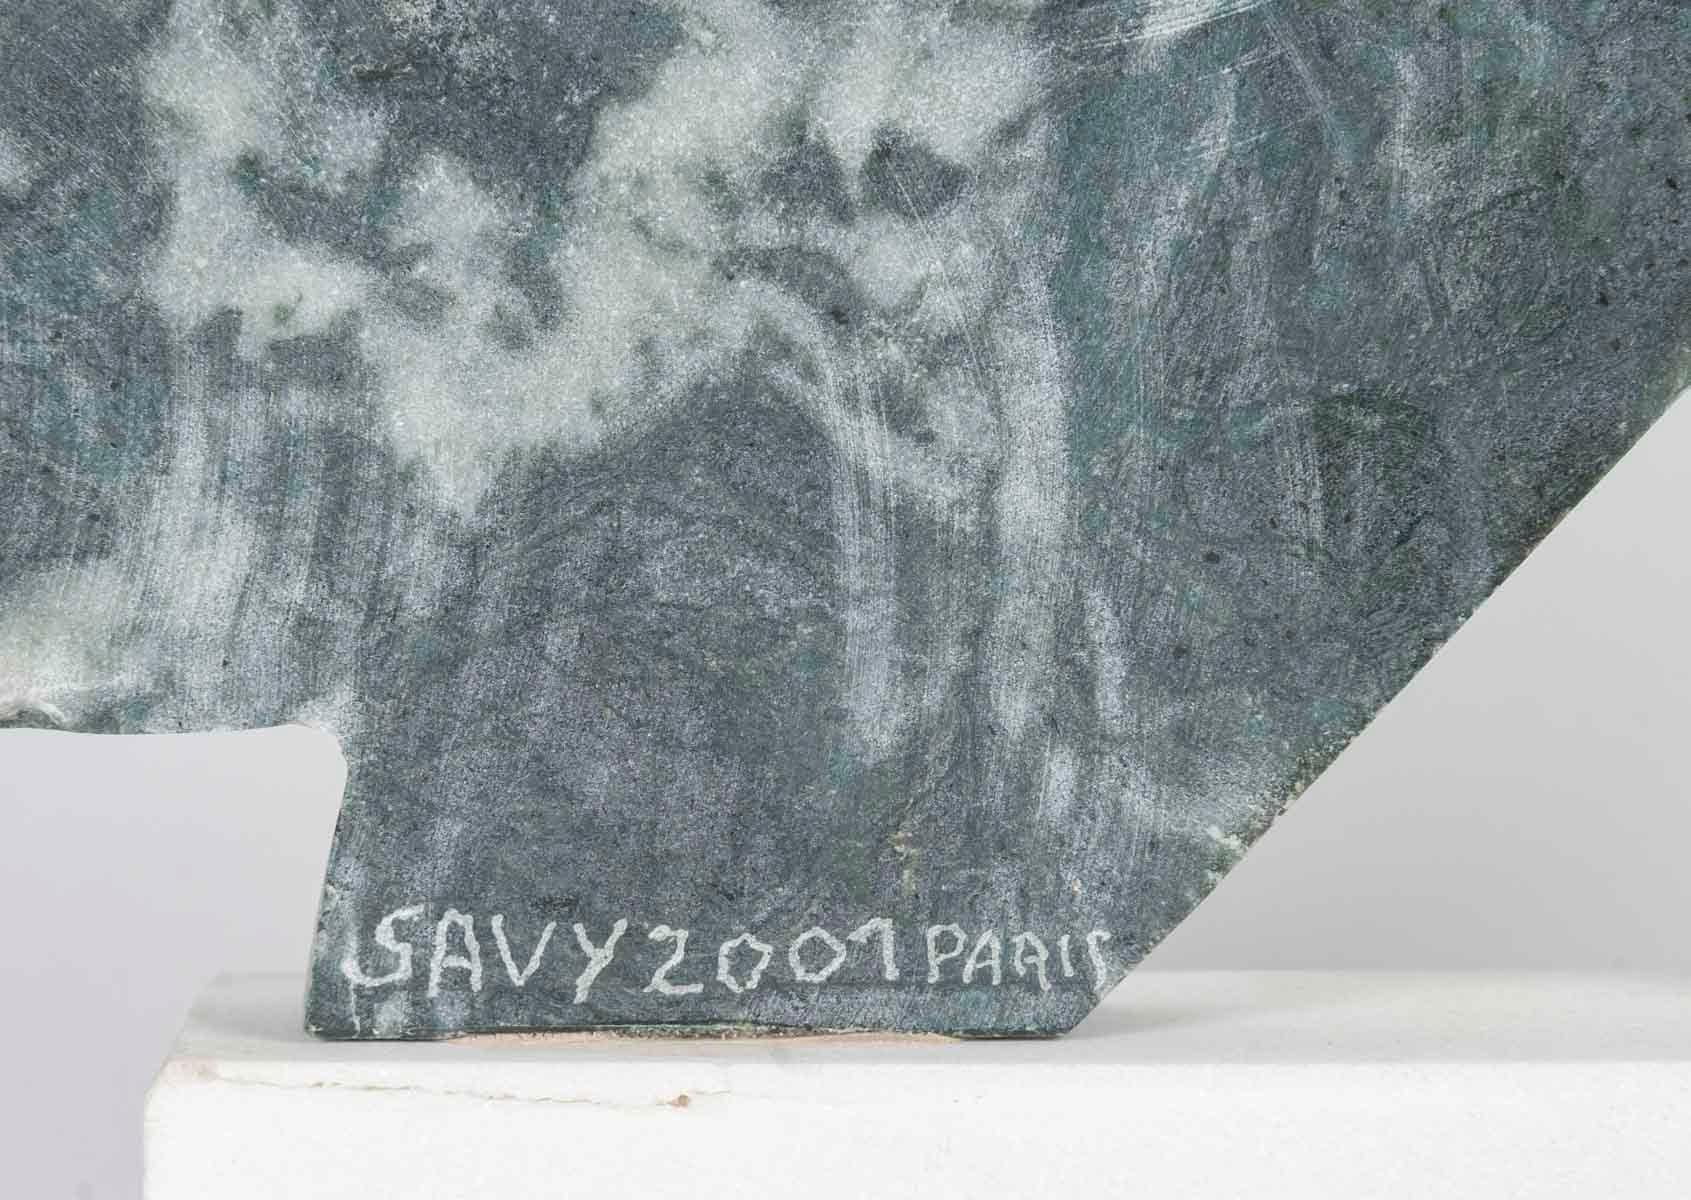 Contemporary Sculpture by François Fernandez, Known as SAVY, in Light Green Marble, Signed. For Sale